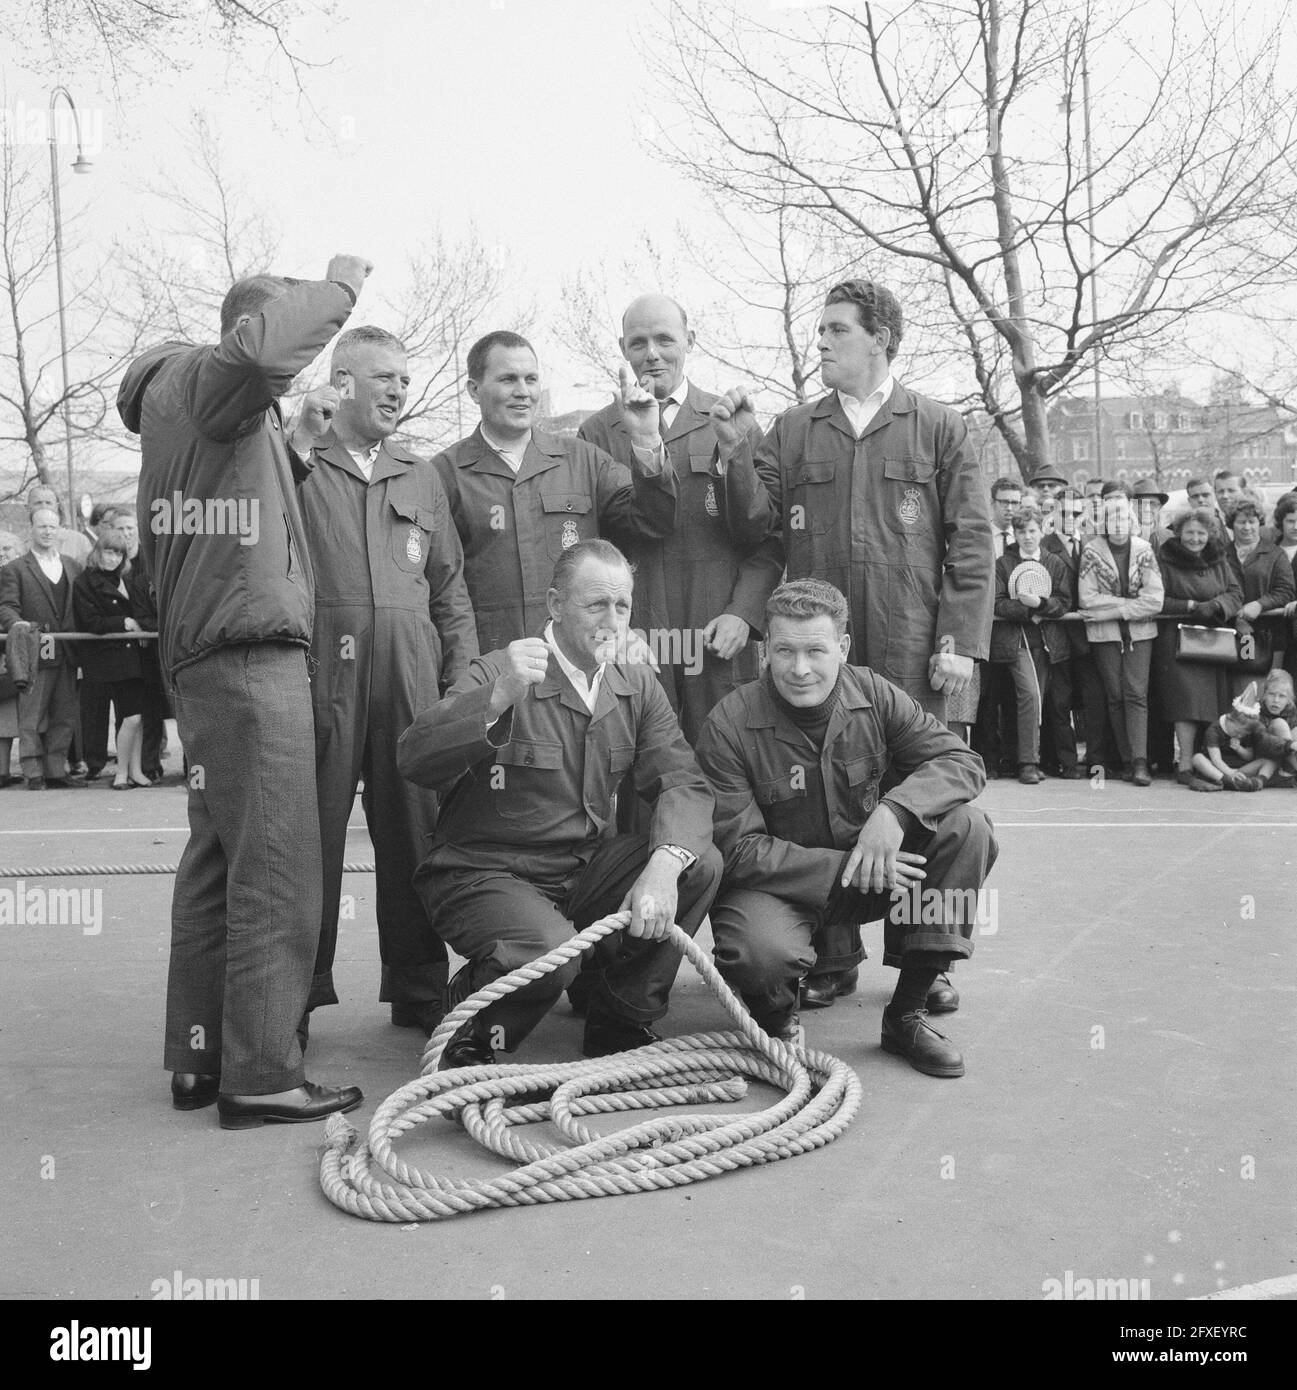 Rope pulling championships of the Netherlands, the KNSM crew, April 30, 1965, Rope pulling, championships, The Netherlands, 20th century press agency photo, news to remember, documentary, historic photography 1945-1990, visual stories, human history of the Twentieth Century, capturing moments in time Stock Photo